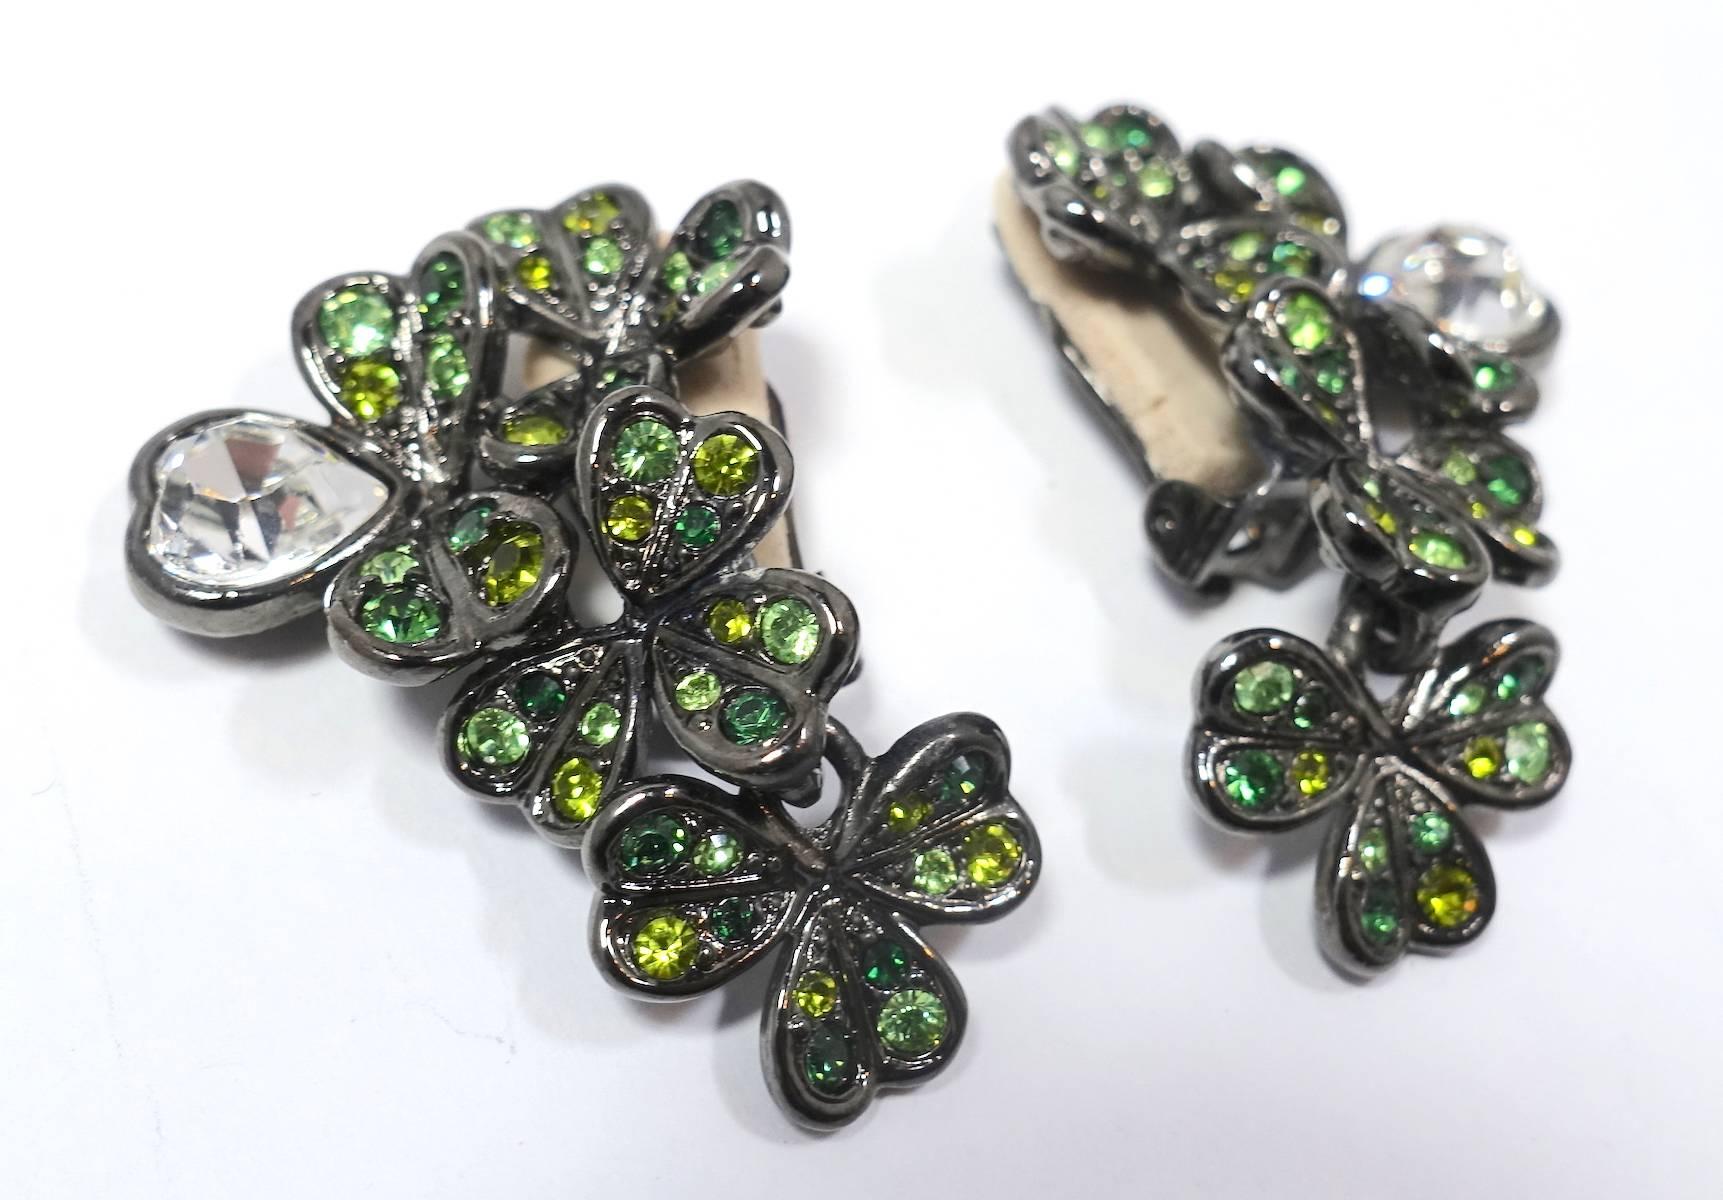 These Kenneth Jay Lane clip earrings feature a 4-leaf clover with a heart petals design. It is accented with green and clear rhinestone in a silver tone metal setting.  These earrings measure 1-1/2” x 1” and are signed “Kenneth Lane”.  They are in